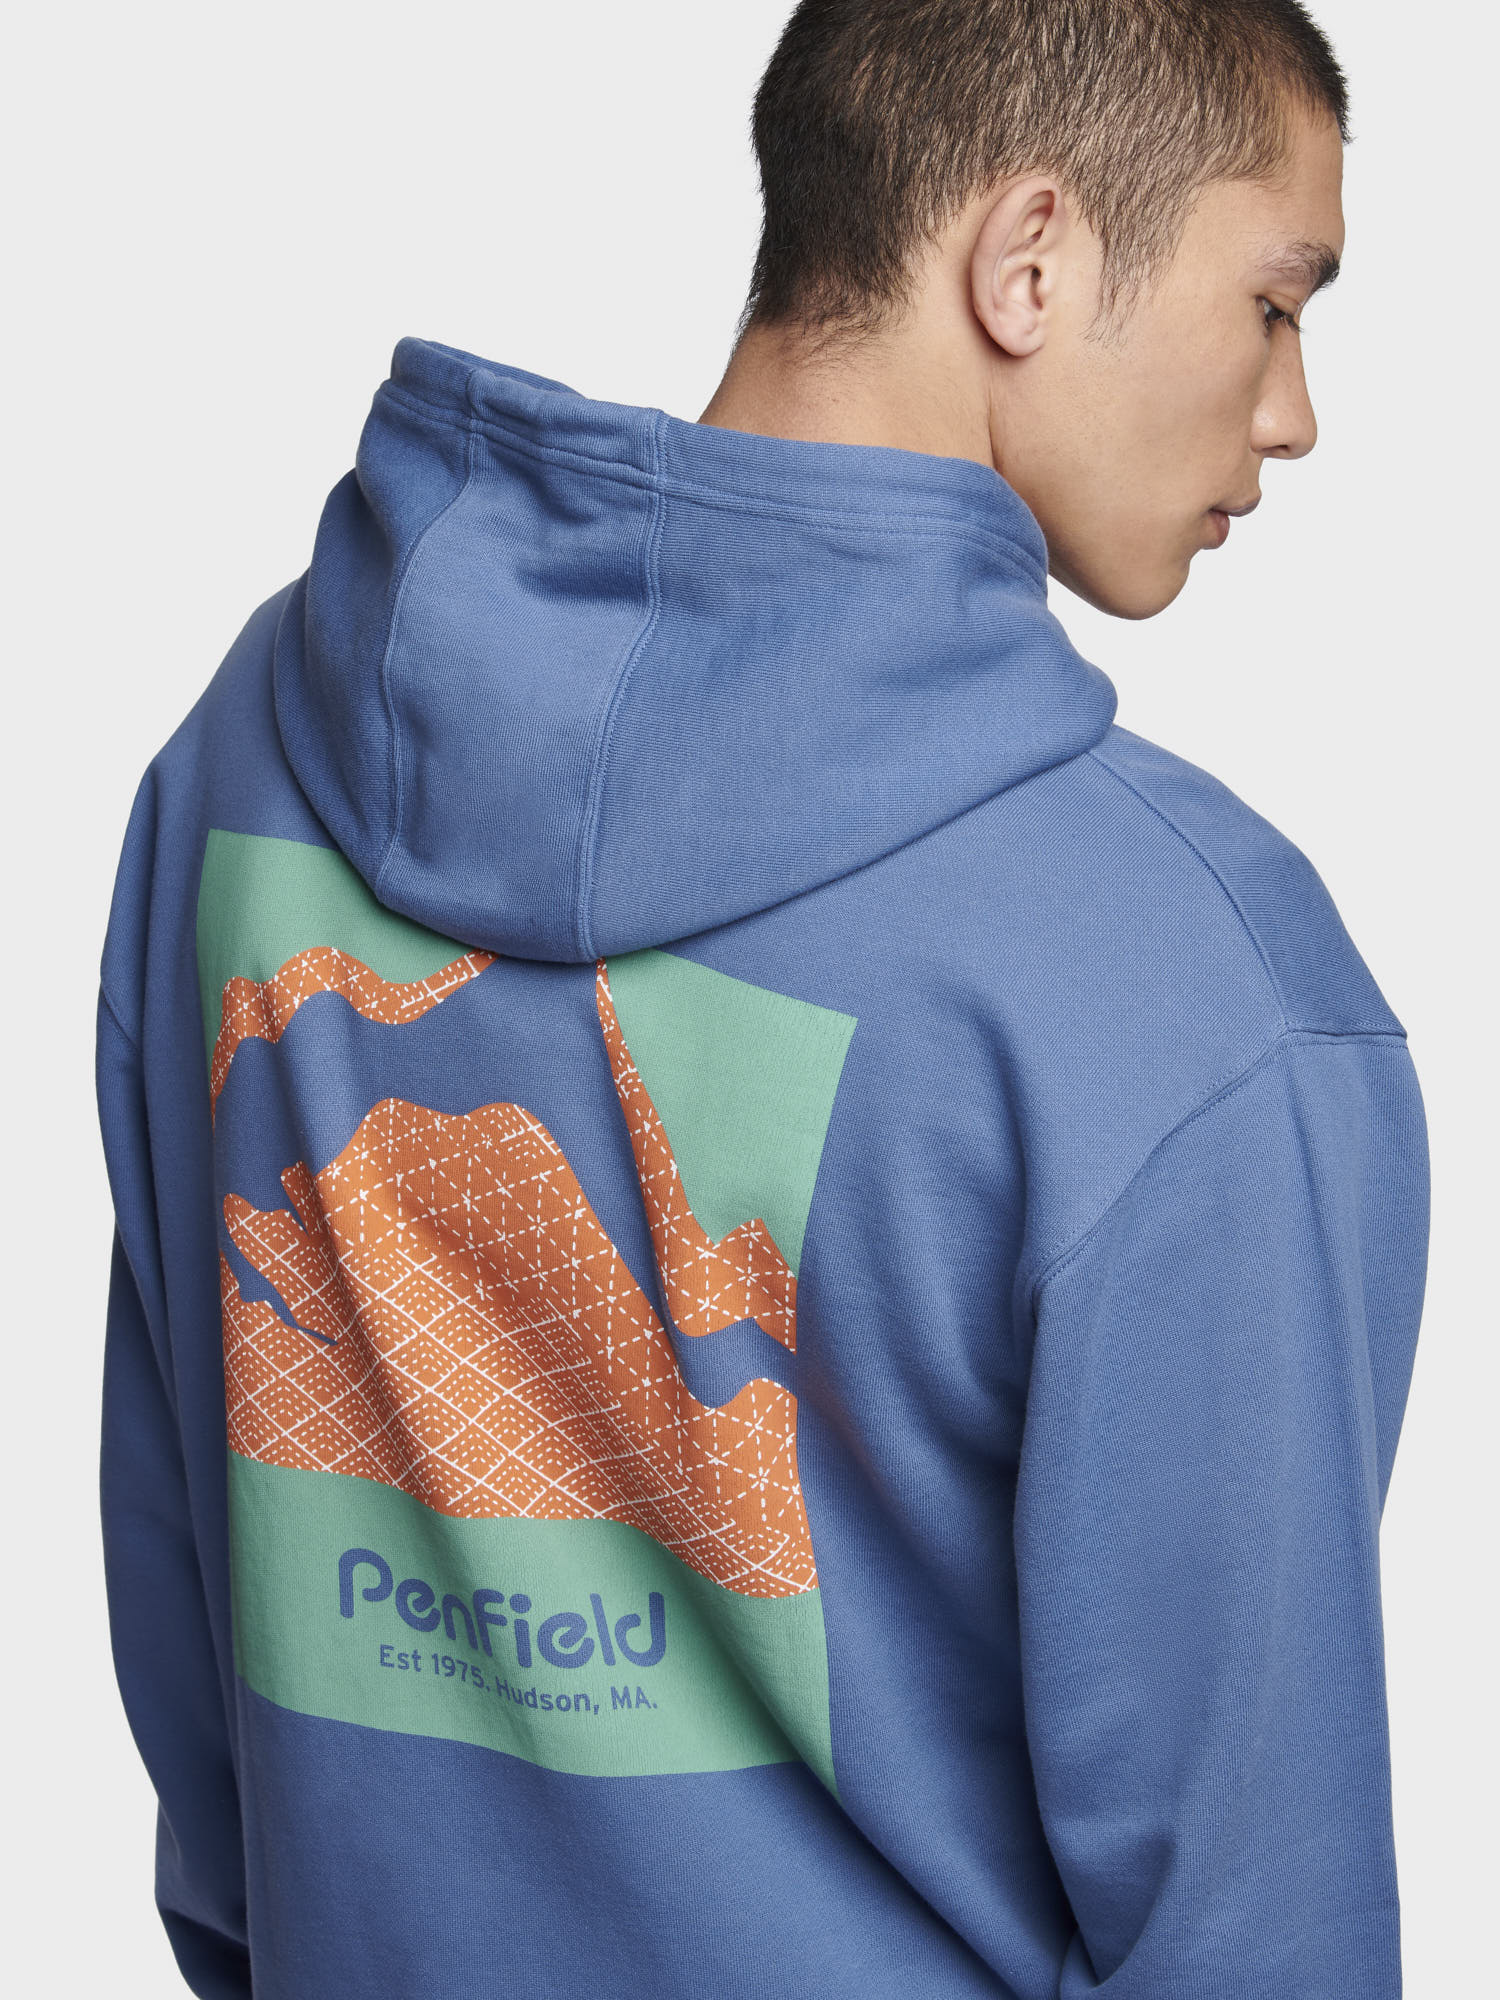 Relaxed Fit Mountain Back Print Hoodie in Blue Horizon